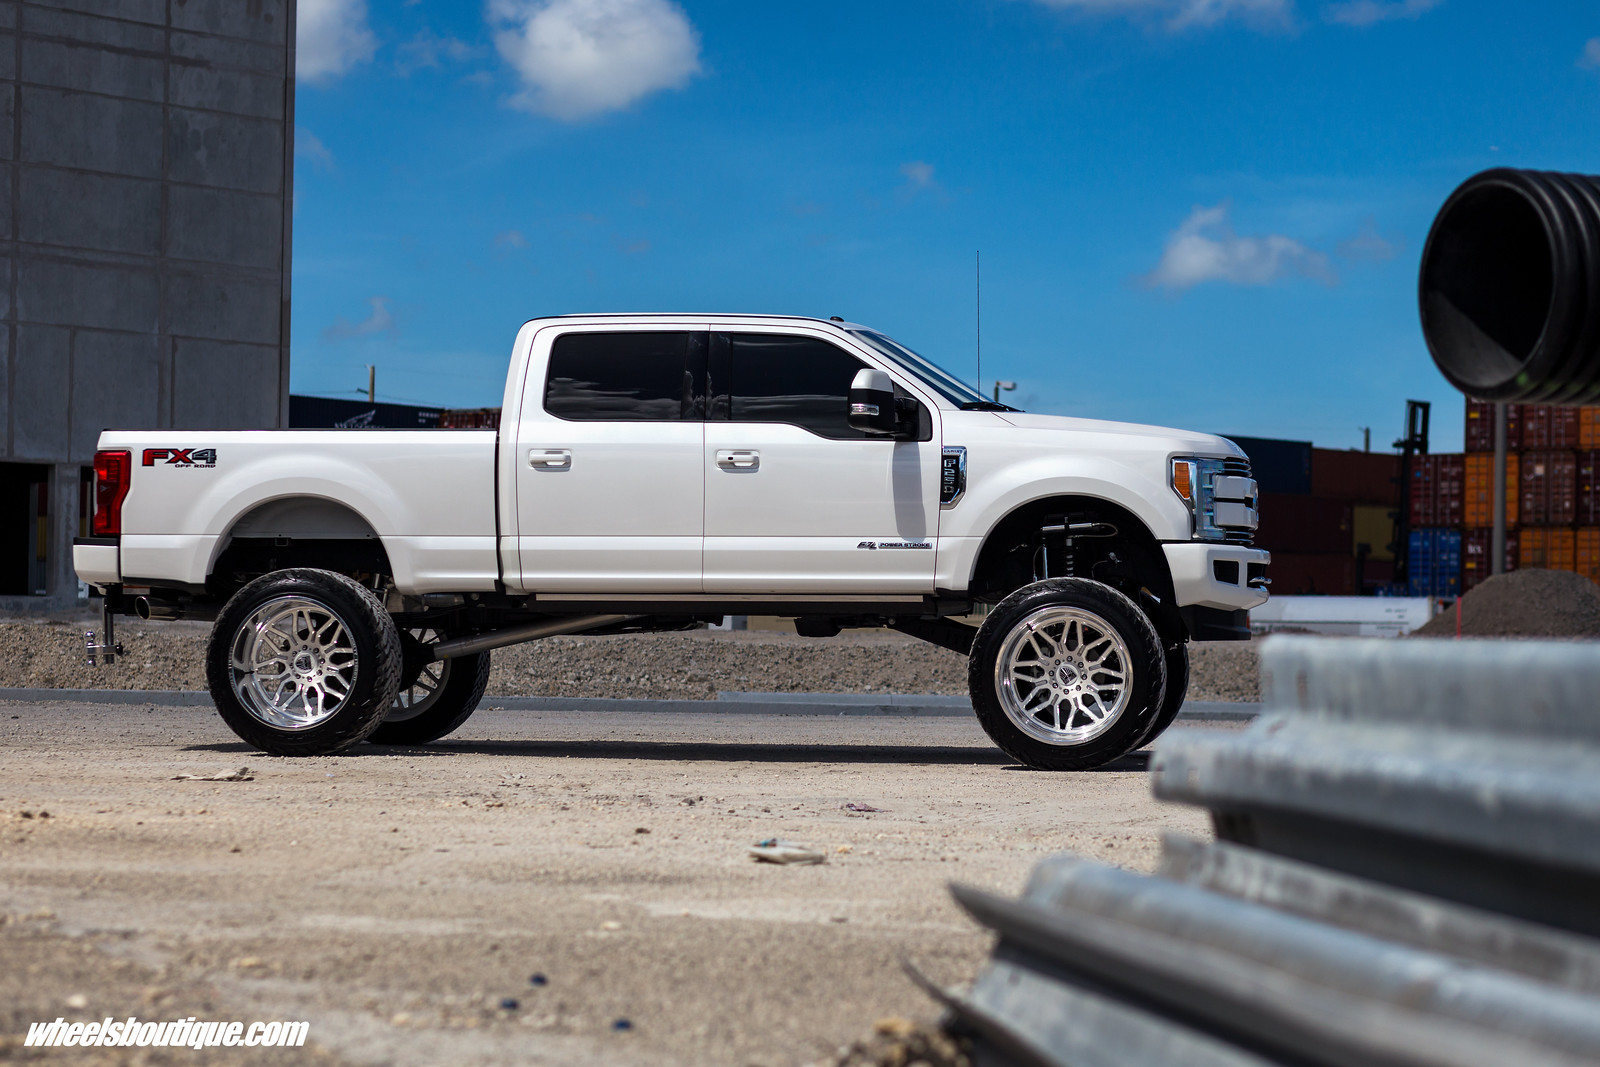 Miami Cowboy – Lifted Ford F250 Platinum by Wheels Boutique 2003 Ford F250 5.4 Oil Capacity